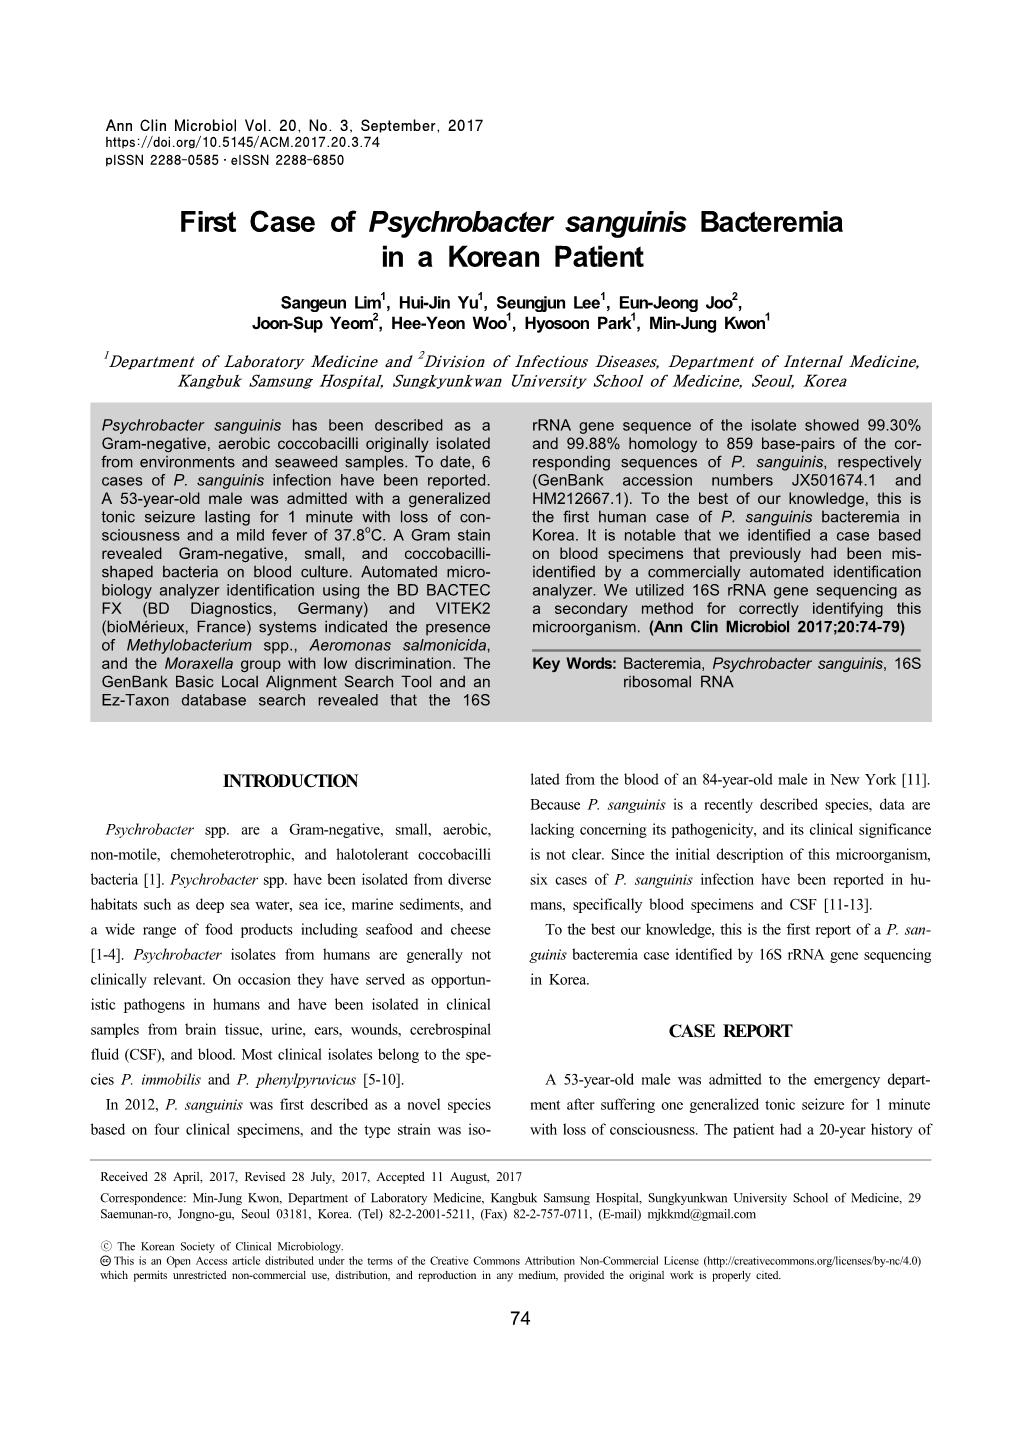 First Case of Psychrobacter Sanguinis Bacteremia in a Korean Patient